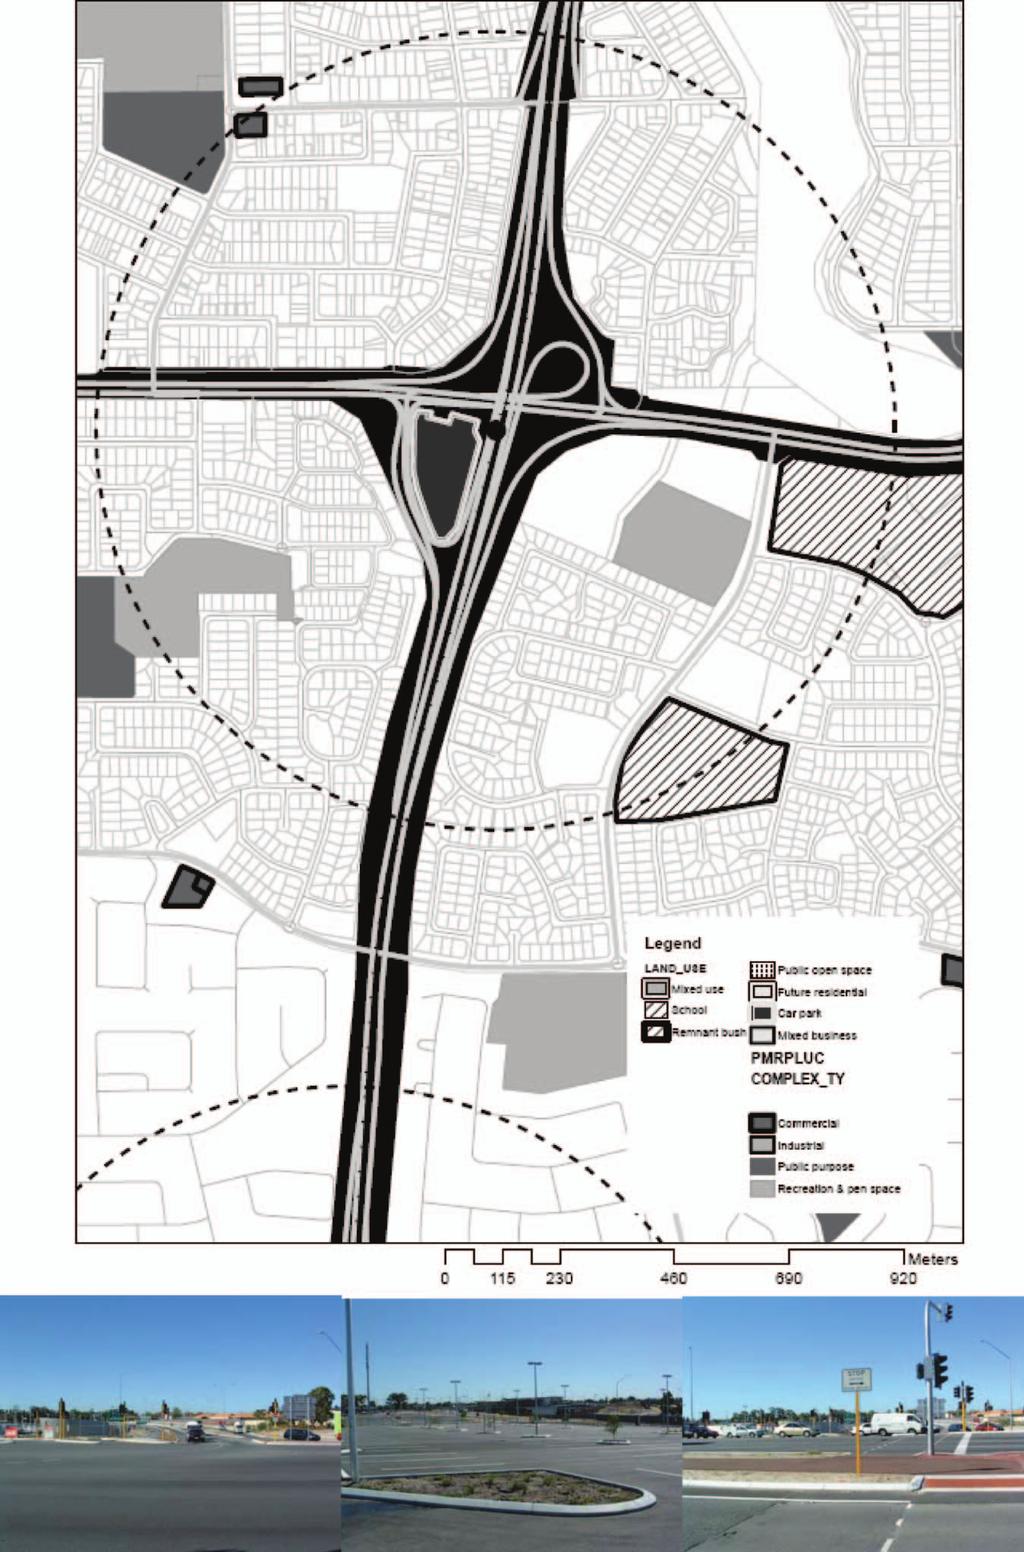 Evolution of the TOD Model for Low-density Cities FIGURE 3. Bullcreek 800m Station Precinct: Land Use.